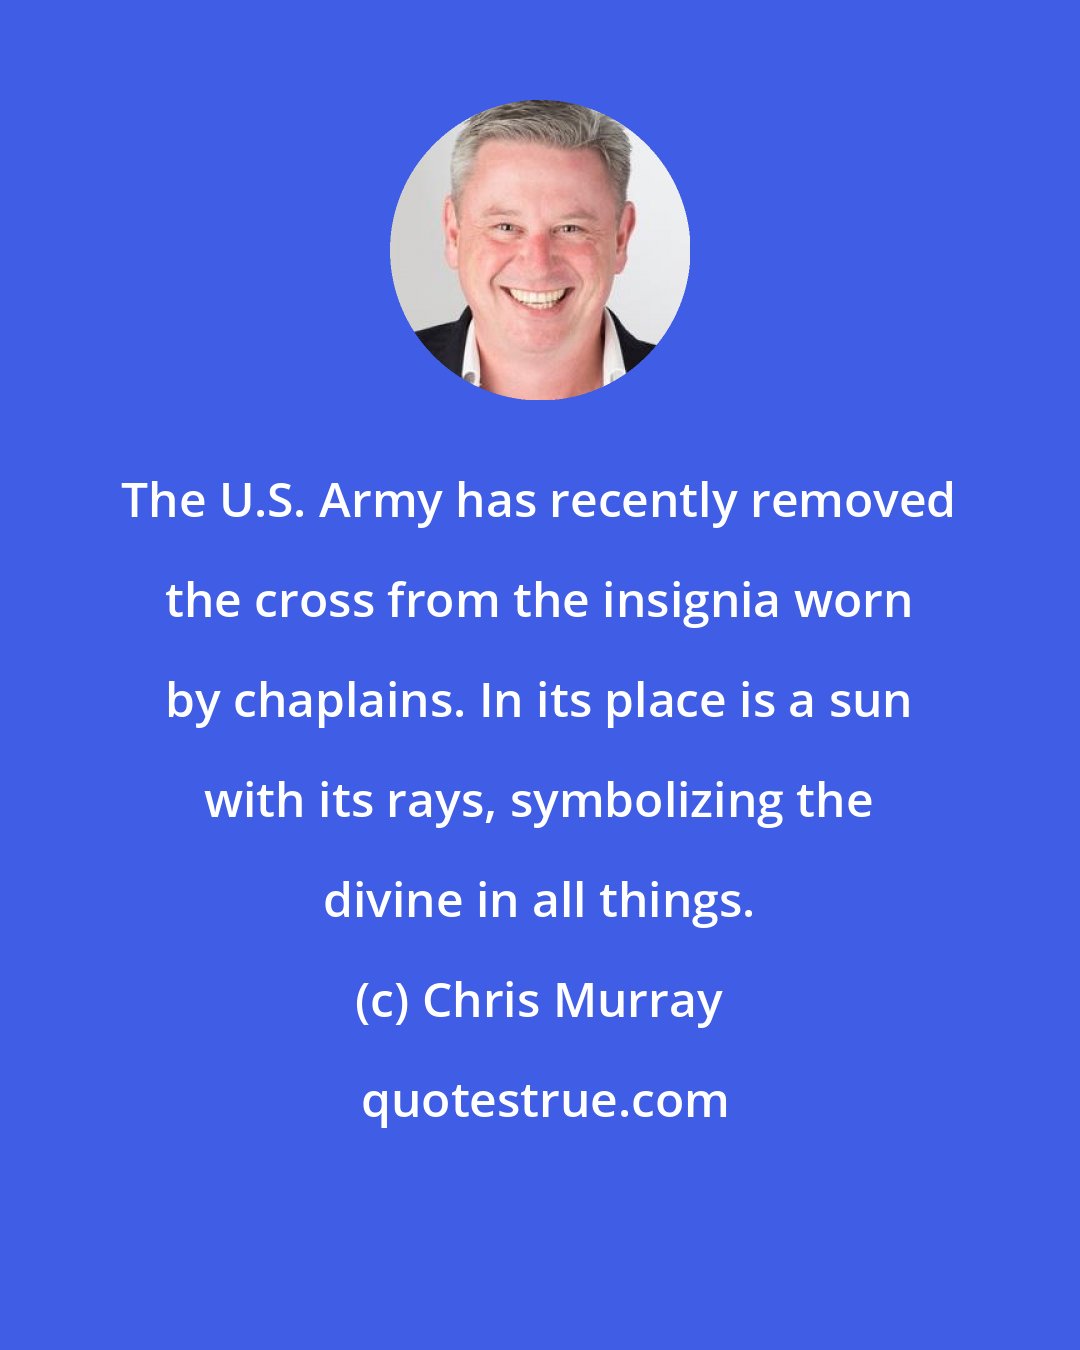 Chris Murray: The U.S. Army has recently removed the cross from the insignia worn by chaplains. In its place is a sun with its rays, symbolizing the divine in all things.